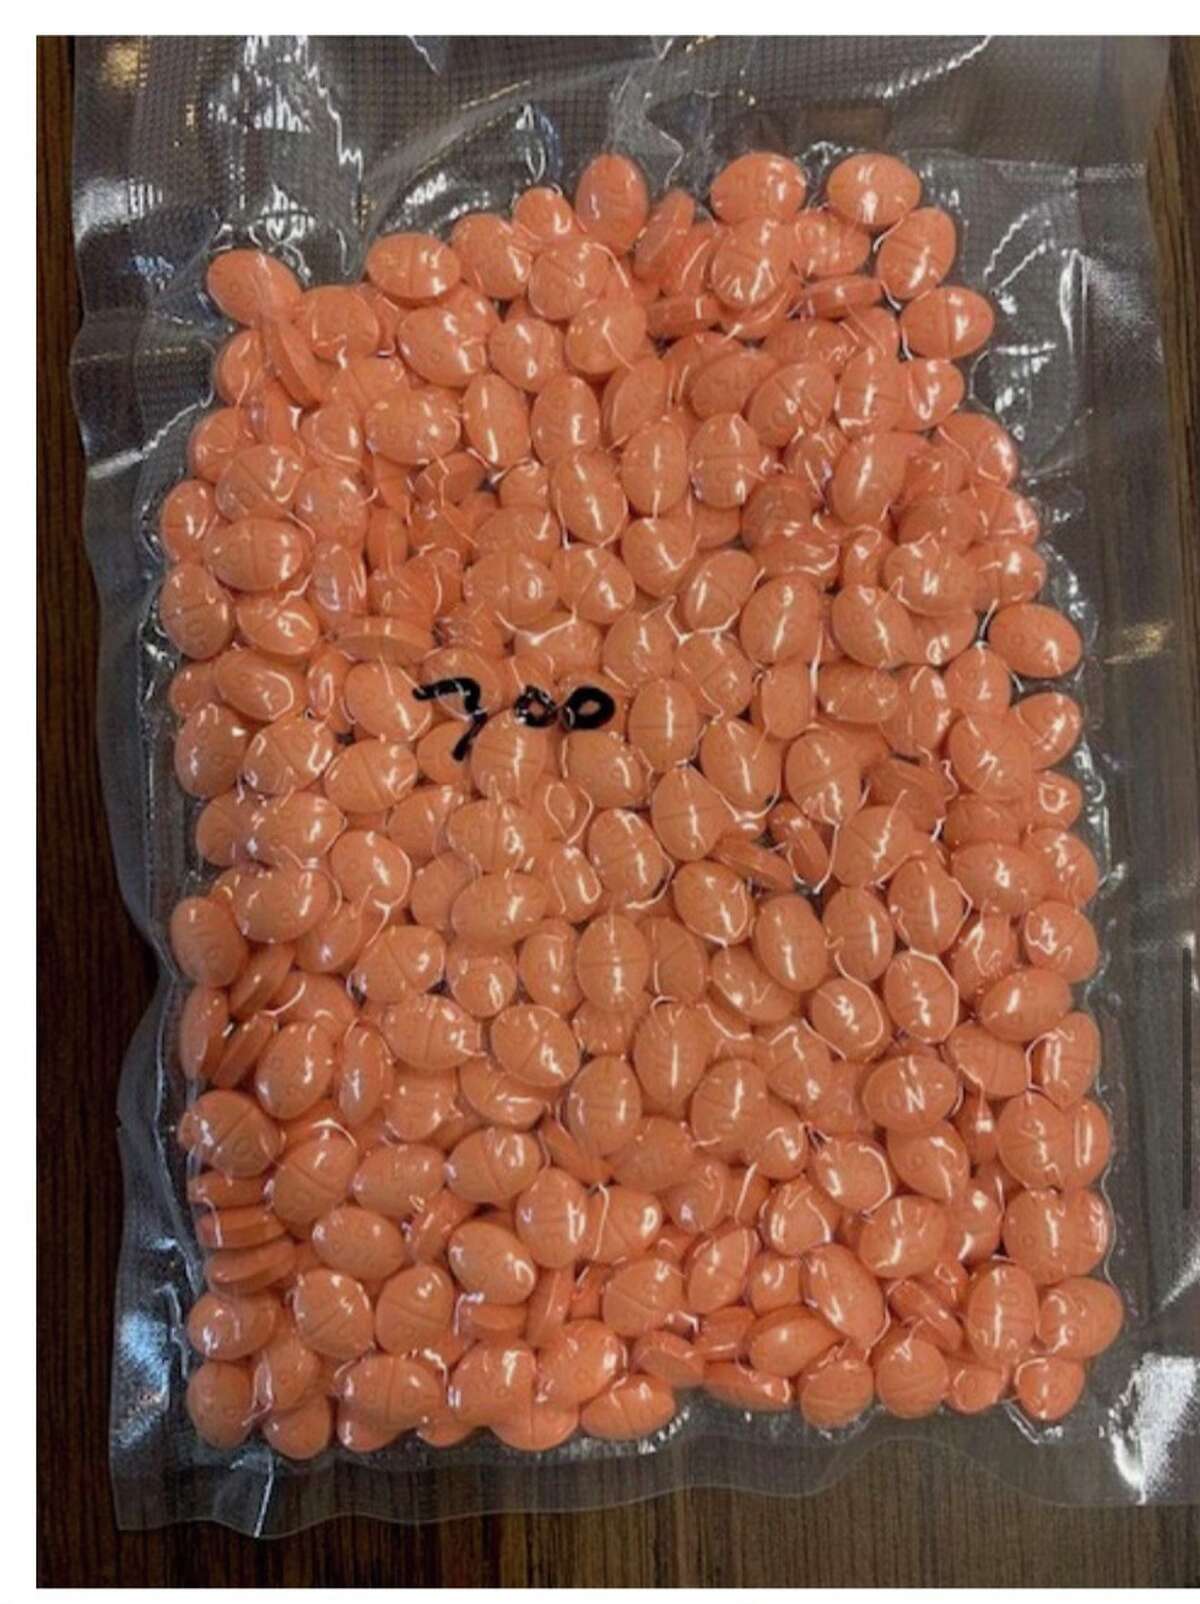 United States Postal Inspection Service intercepted a package containing over 300 meth pills destined for Traverse City. 